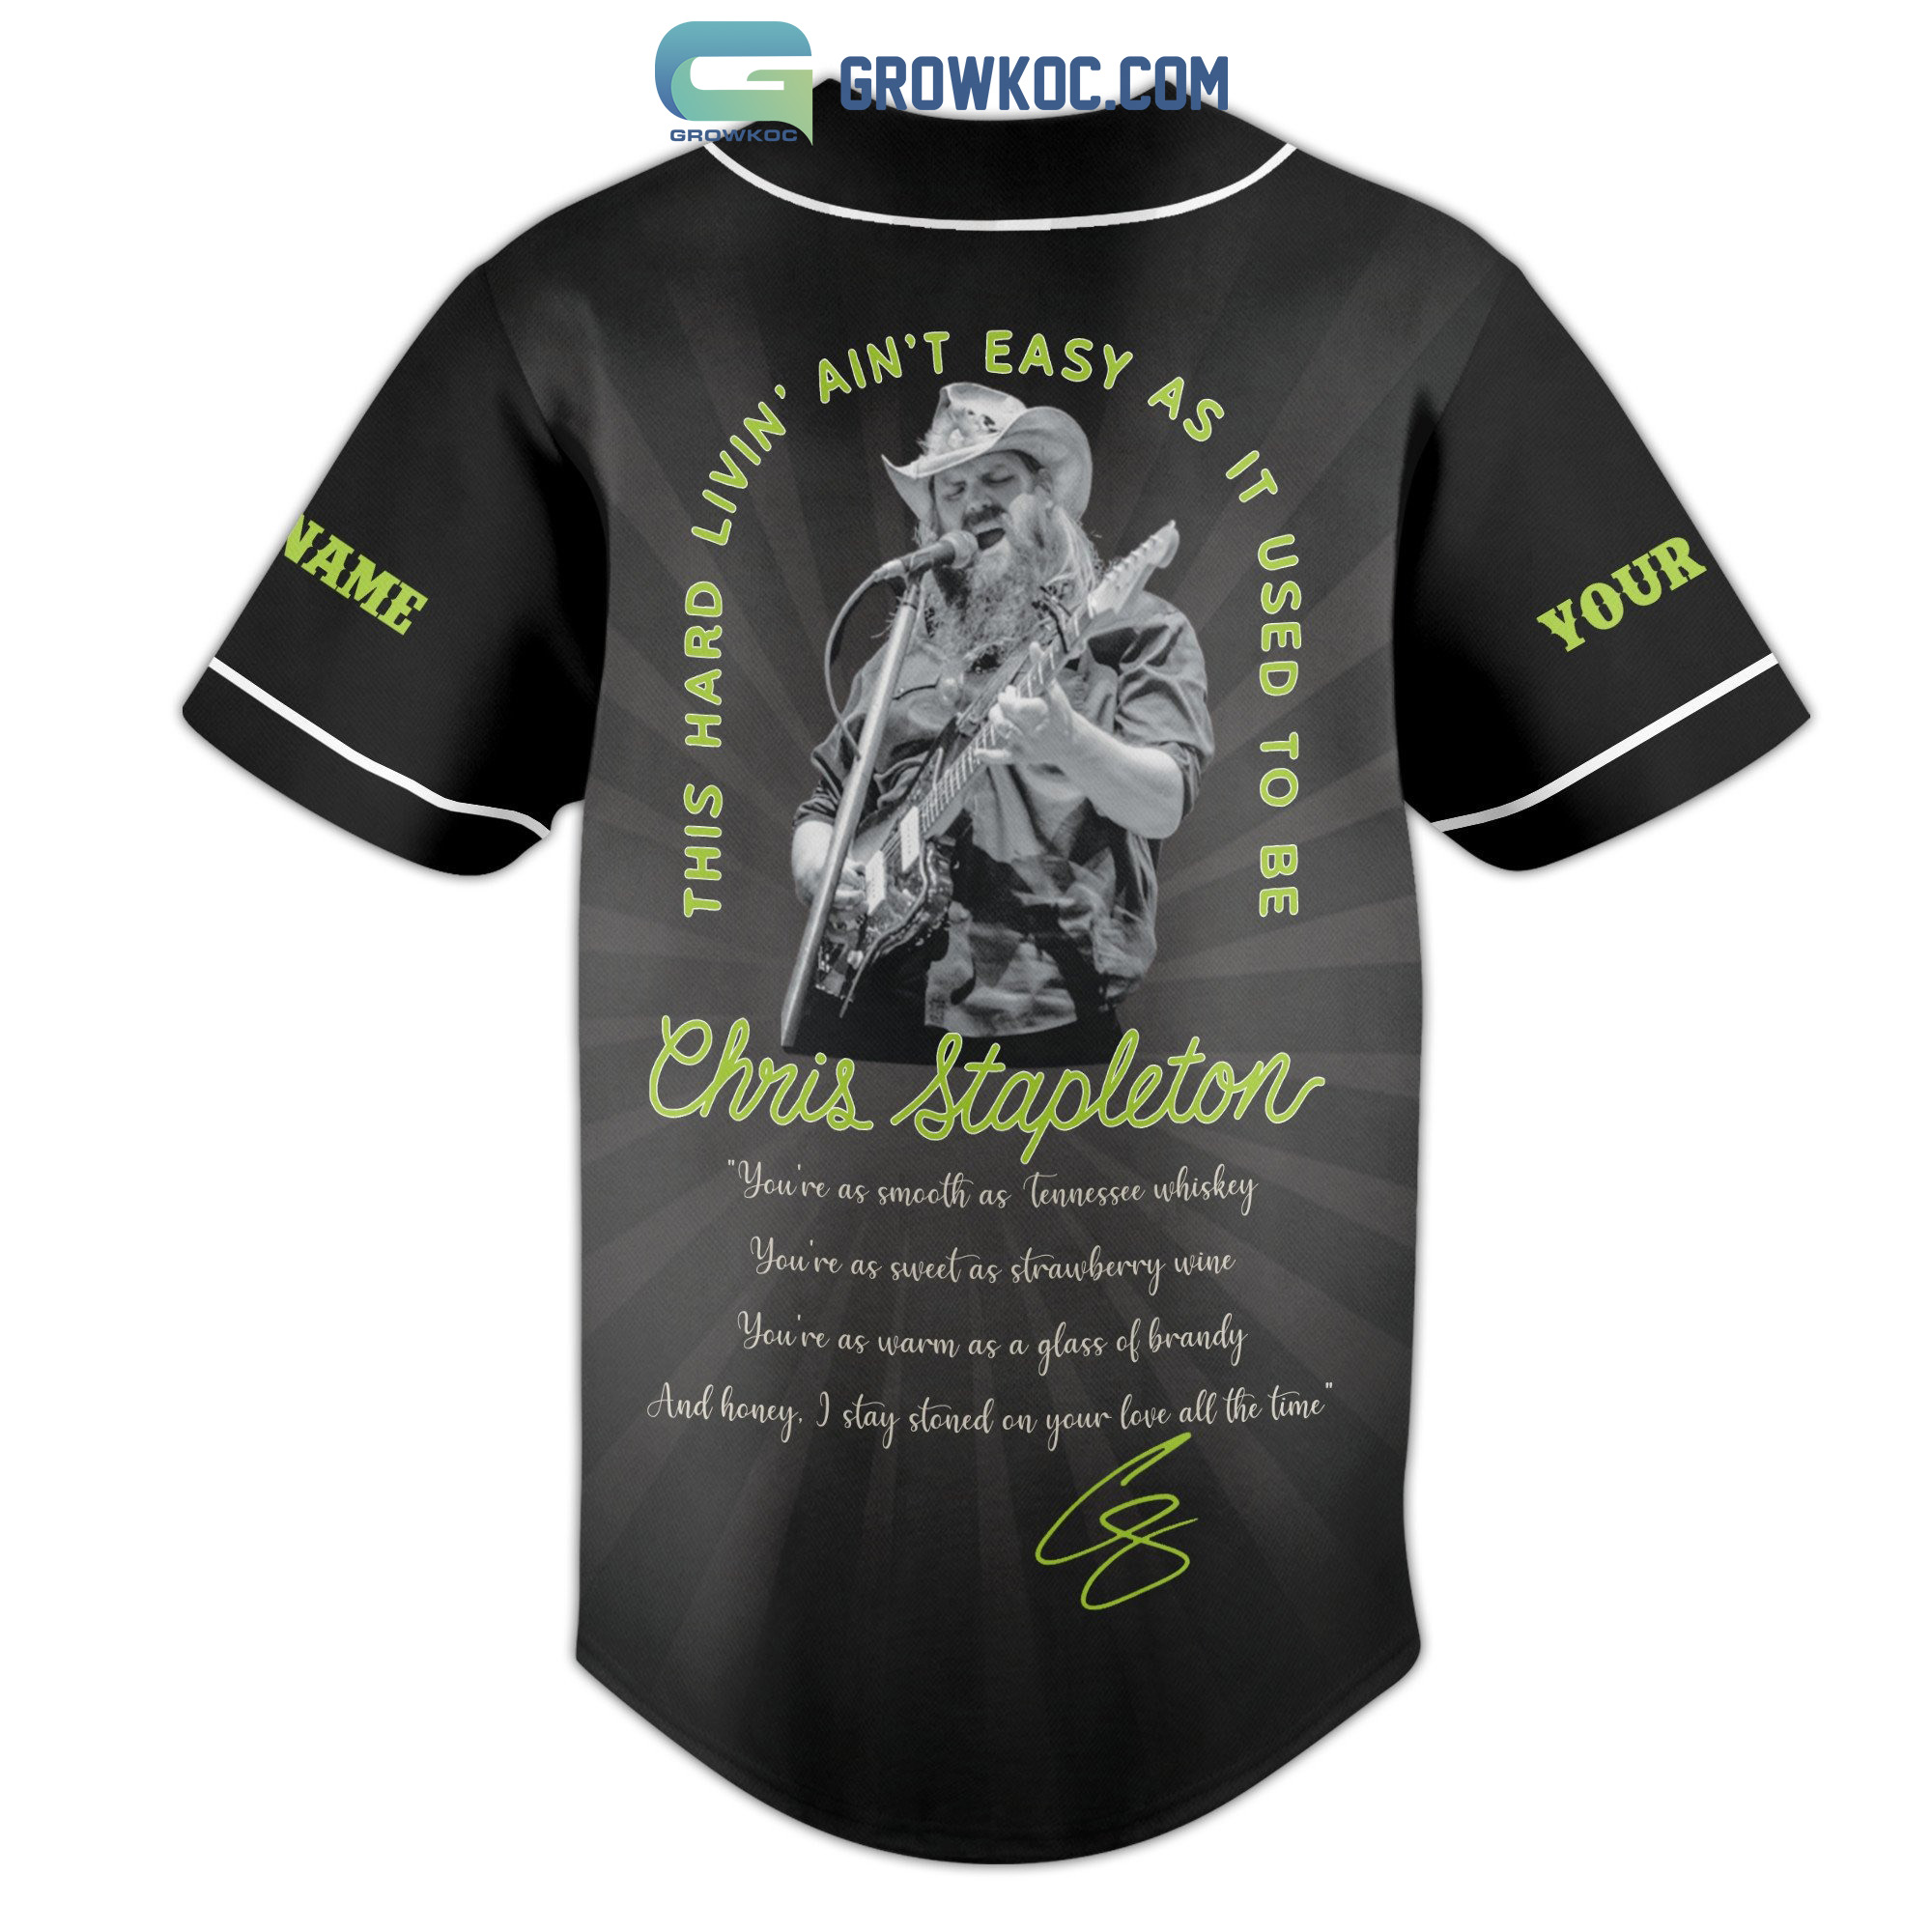 Chris Stapleton All American Road Show 2023 Personalized Baseball Jersey